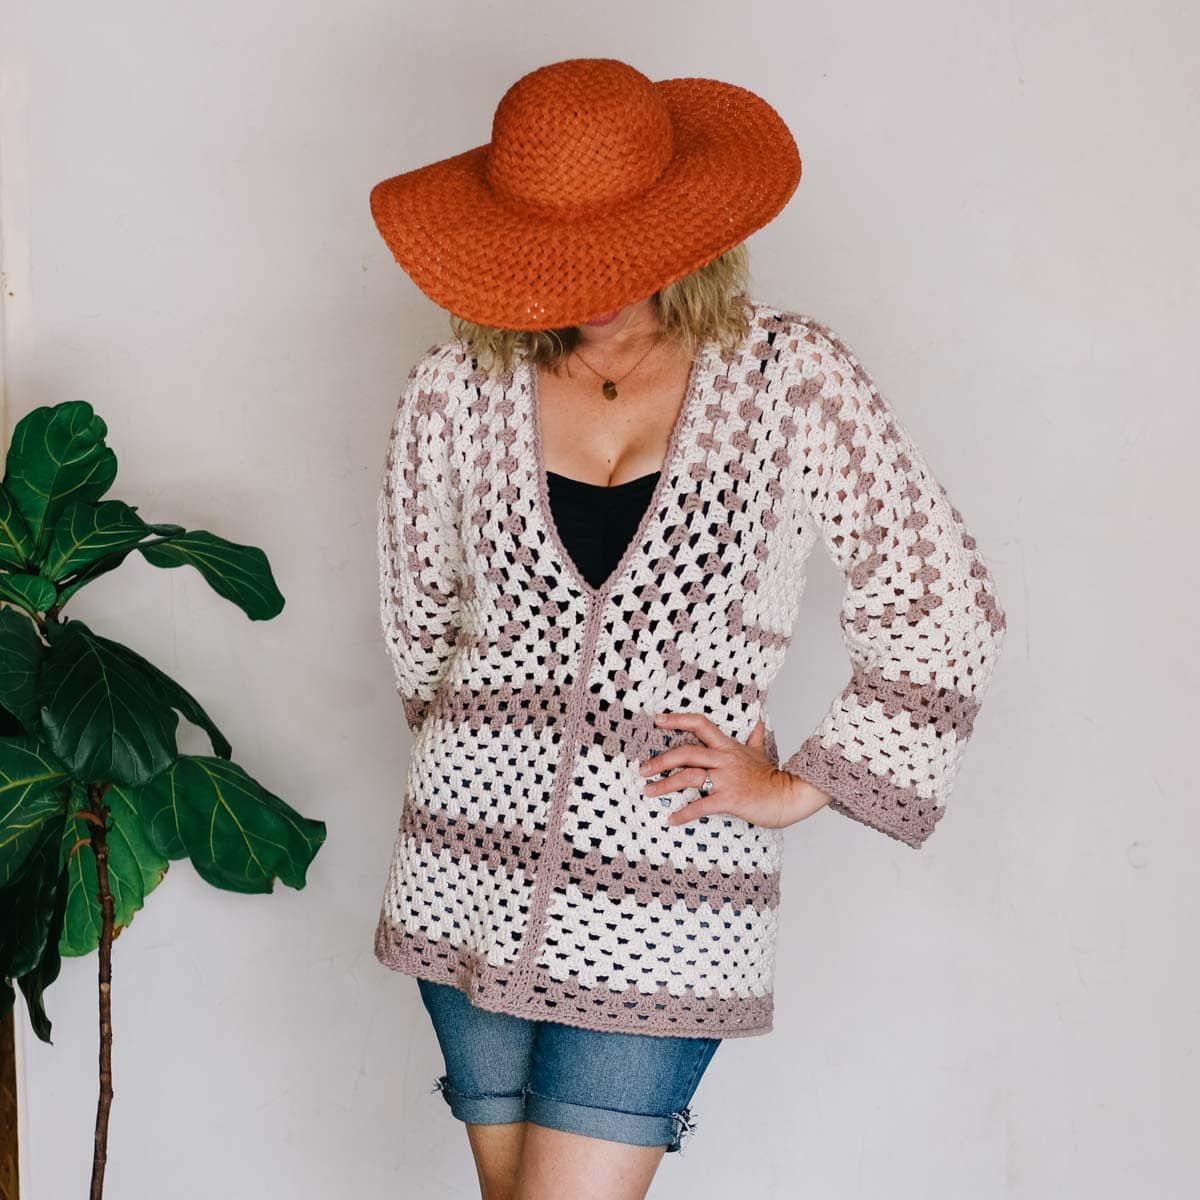 Easy Crochet Beach Coverup Pattern Made from Two Hexagons